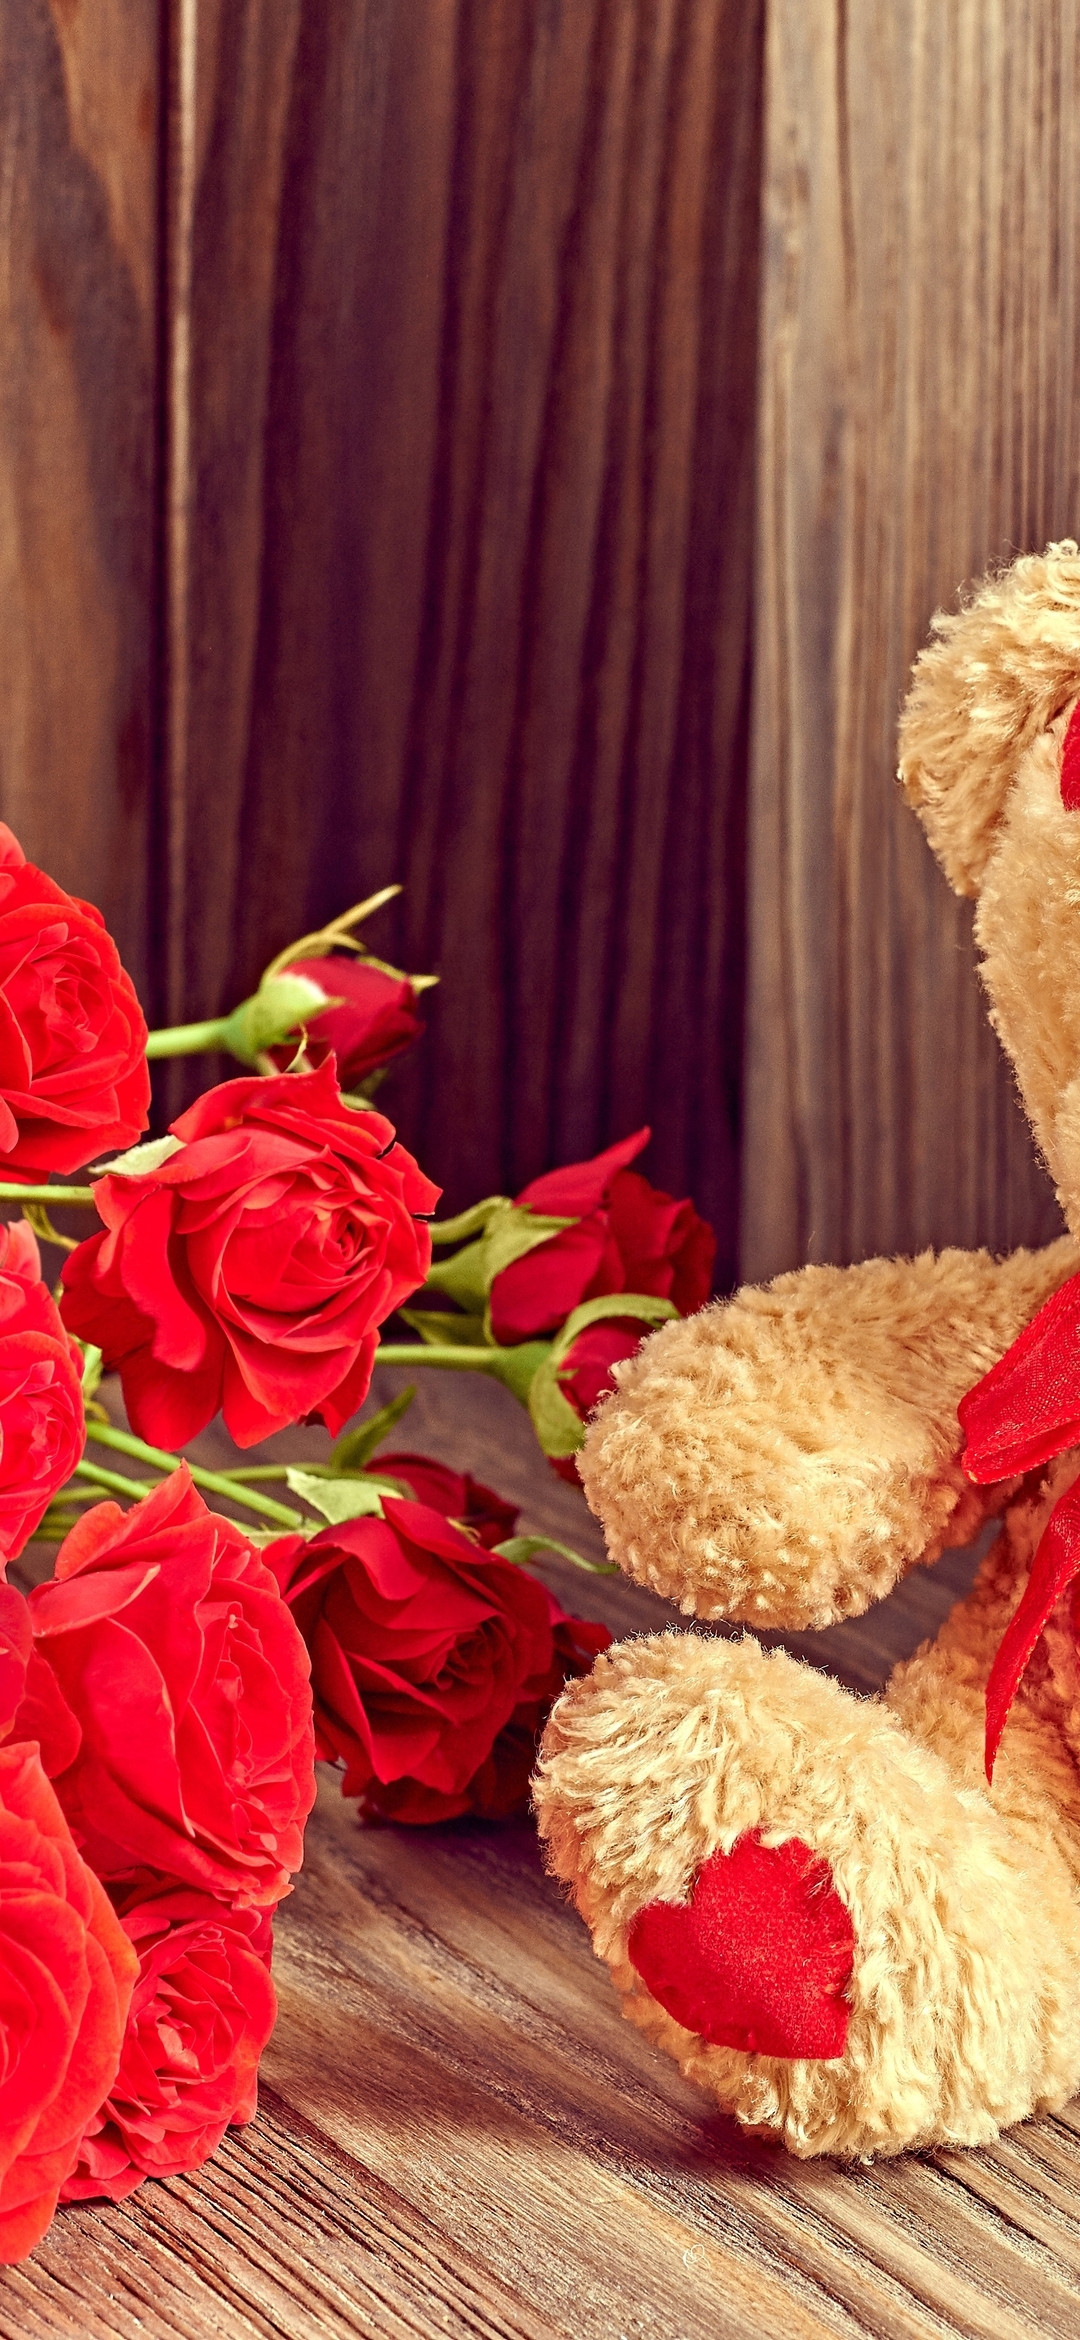 Image: Teddy, bear, toy, soft, roses, flowers, red, heart, ribbon, Valentine's Day, love